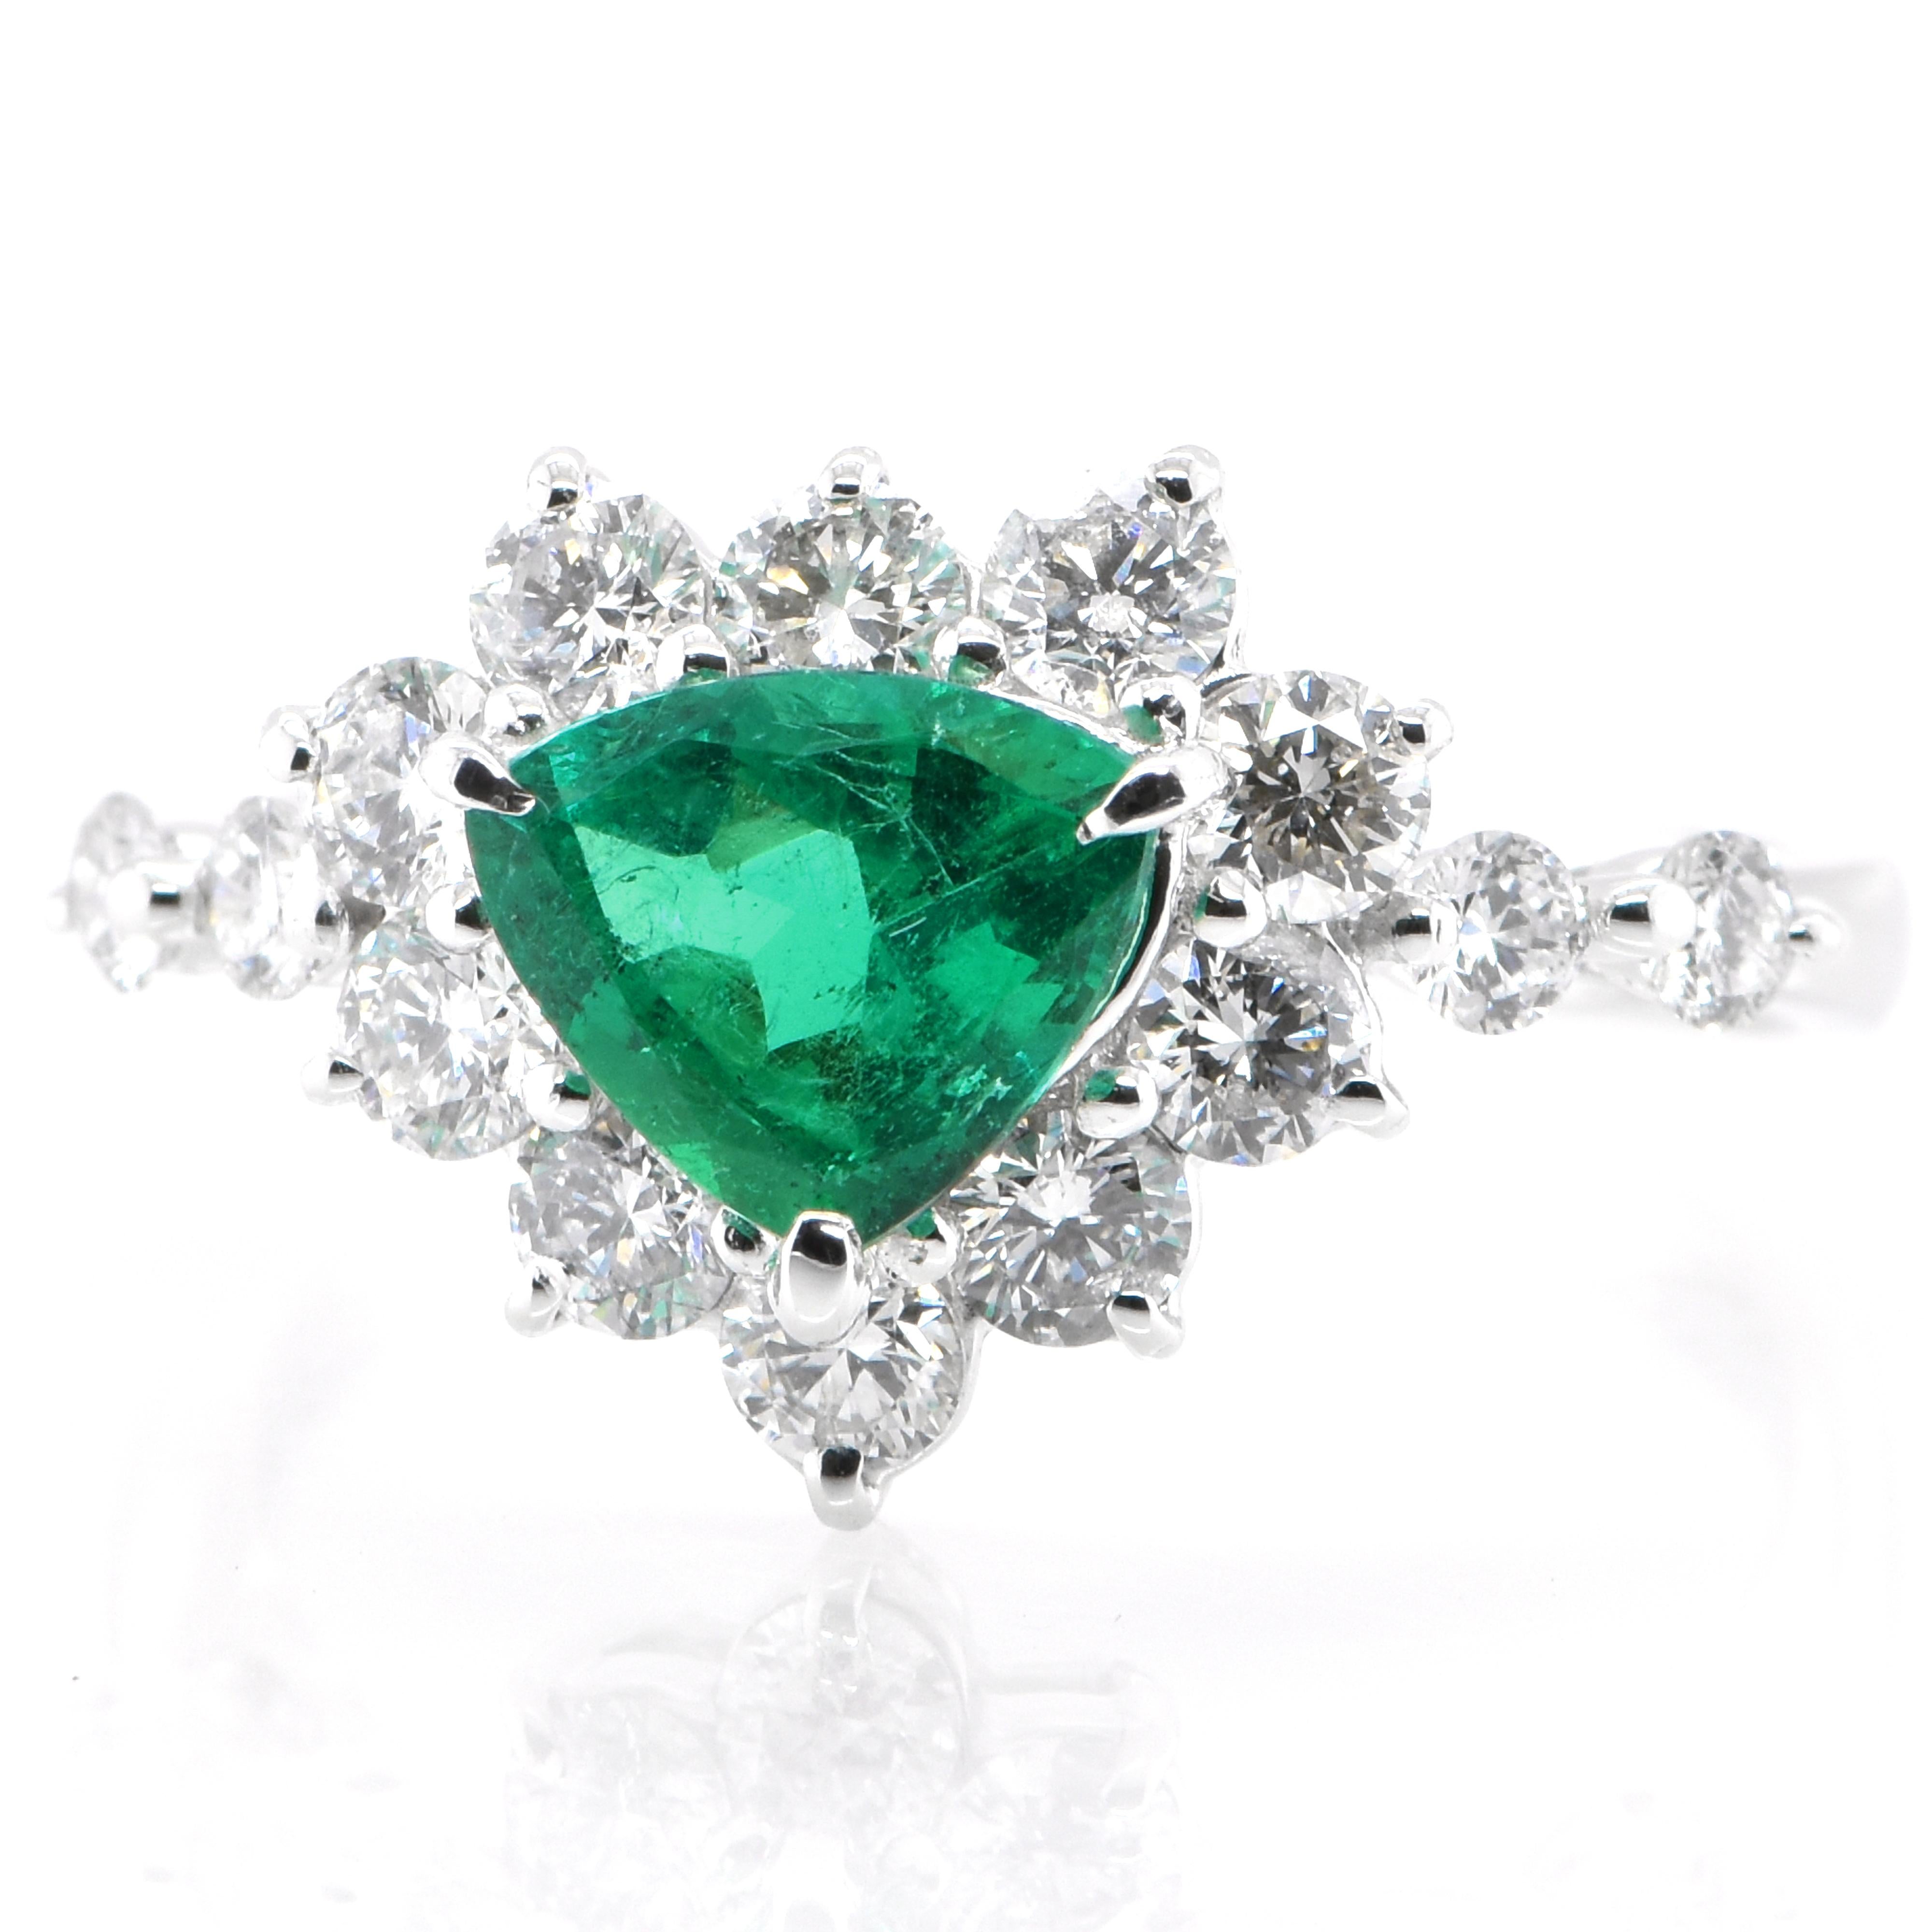 A stunning ring featuring a 0.83 Carat Natural Emerald and 0.90 Carats of Diamond Accents set in Platinum. People have admired emerald’s green for thousands of years. Emeralds have always been associated with the lushest landscapes and the richest